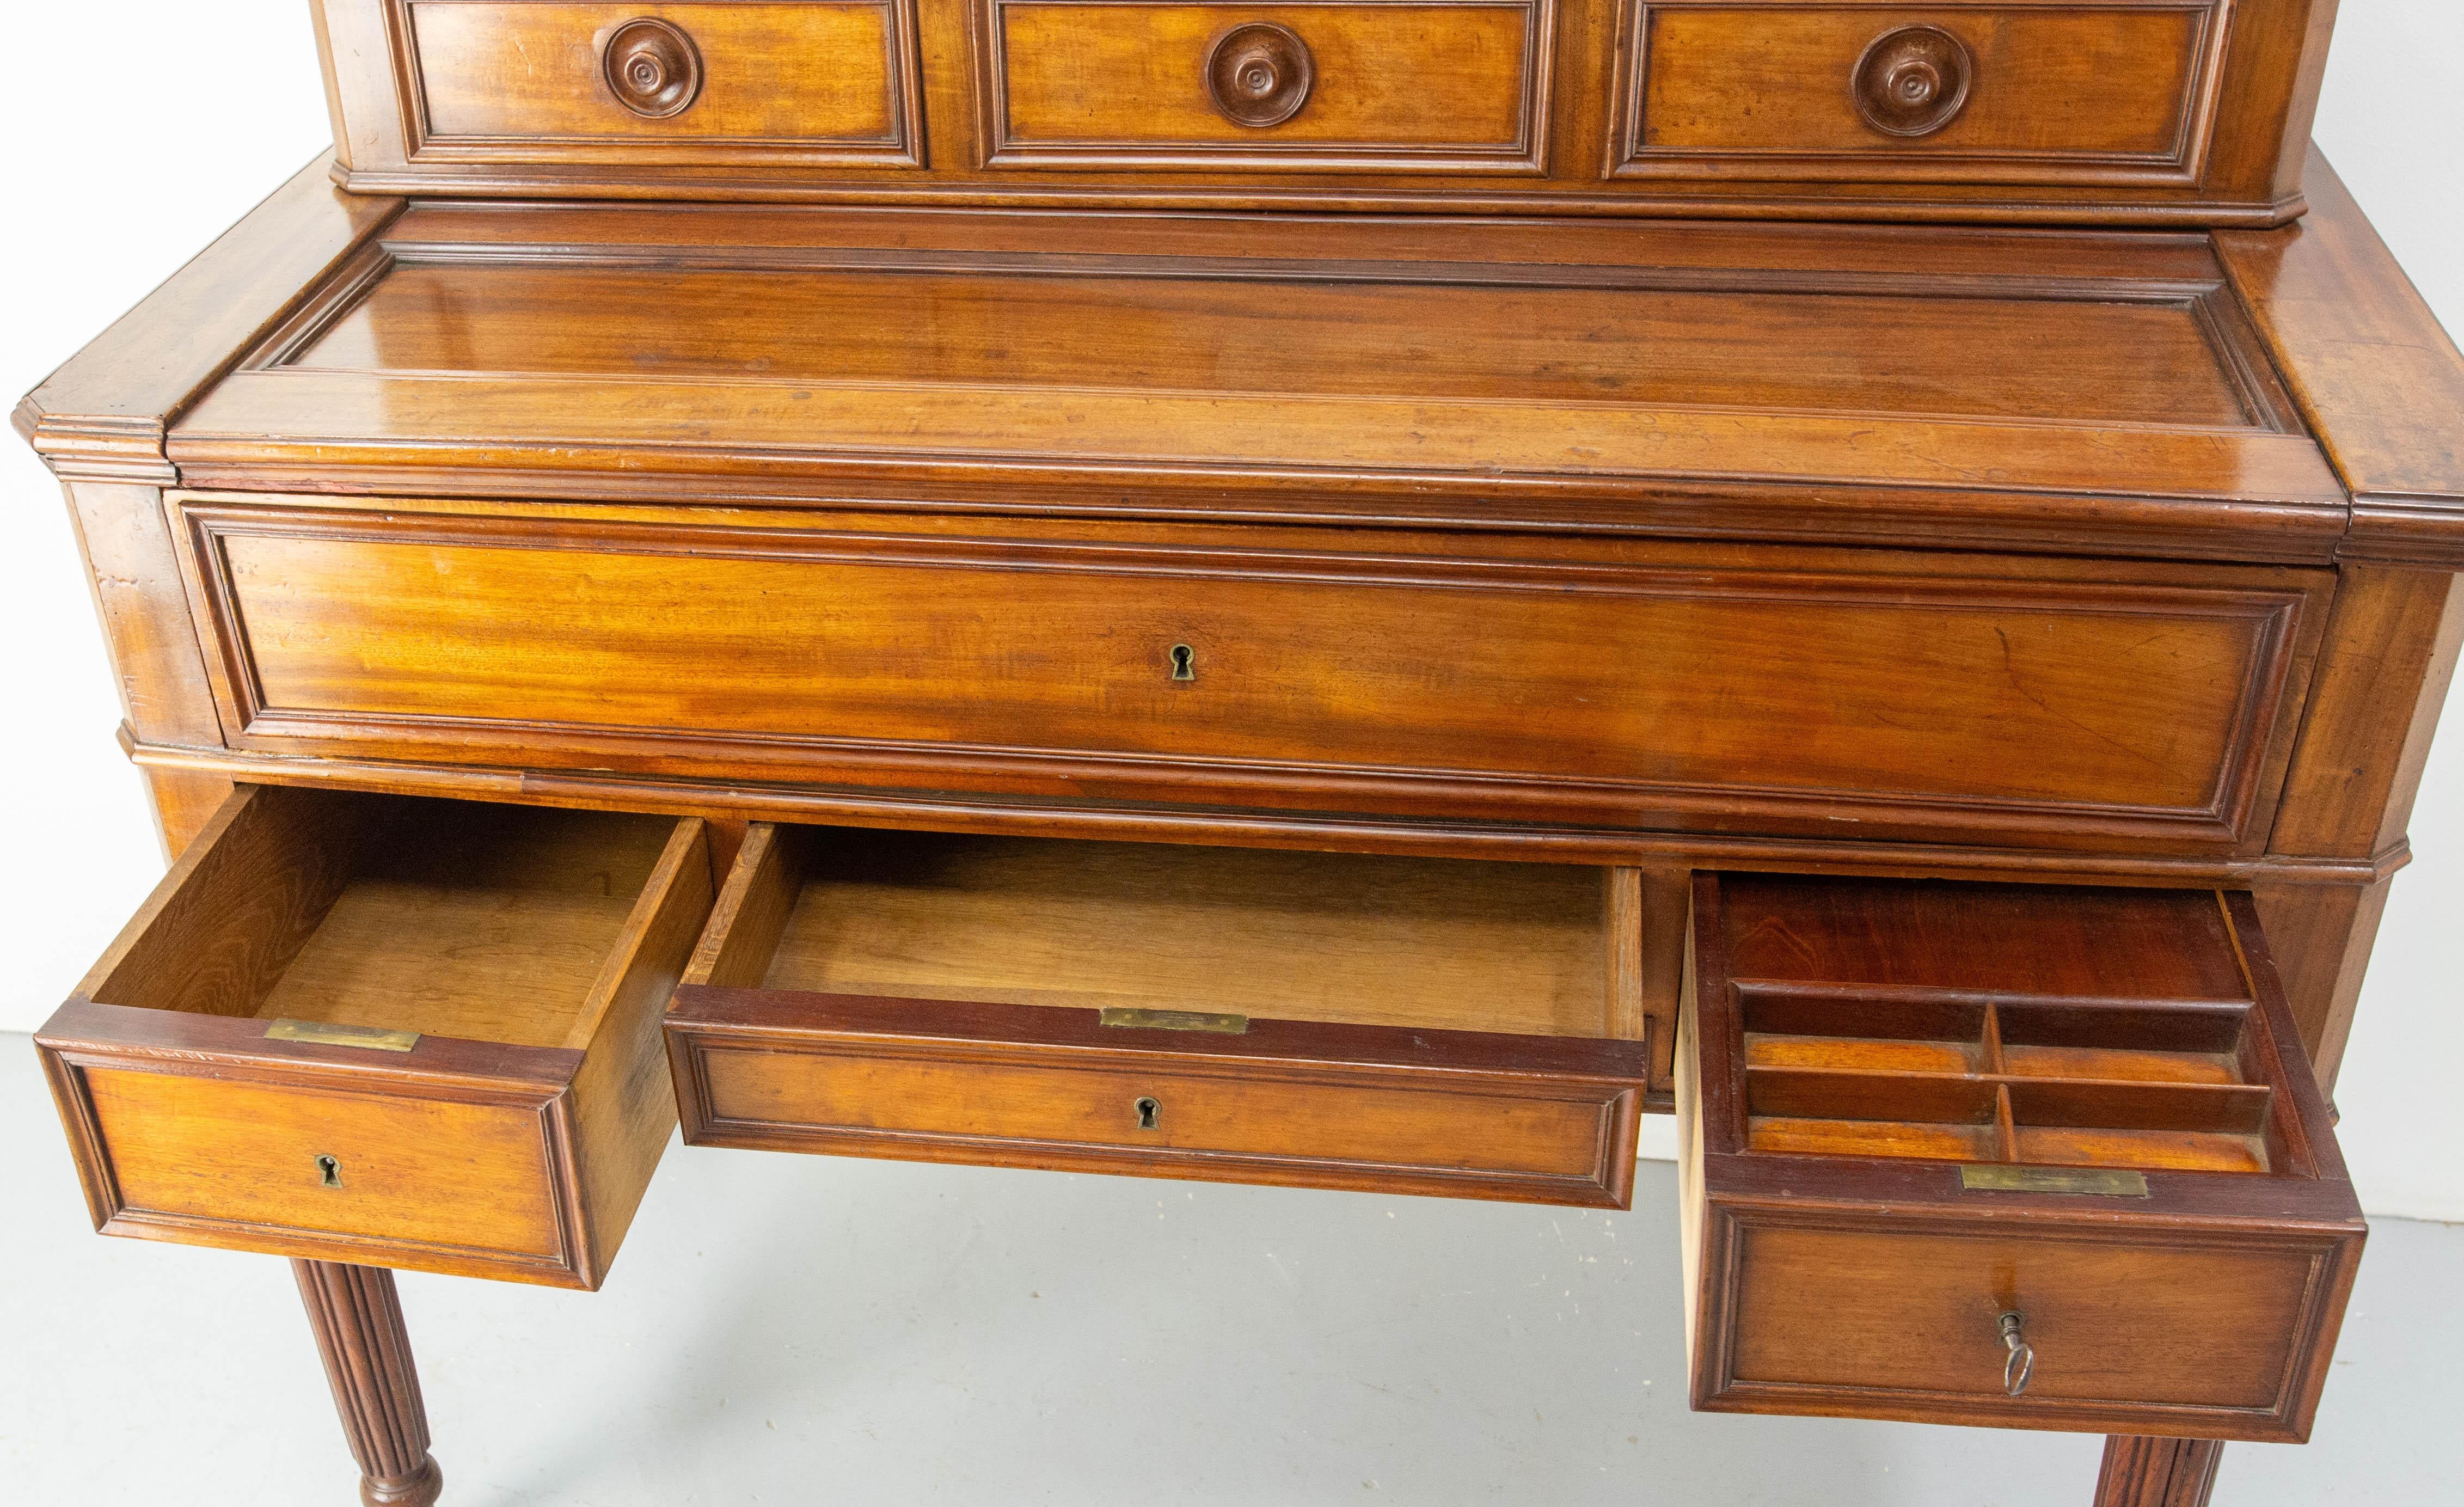 French 19th century Louis Philippe exotic wood desk, the top is recovered of coated fabric.
This secretary can be all locked. When the desk part is closed, the three top drawers cannot be opened thanks to a clever locking system. To open the desk